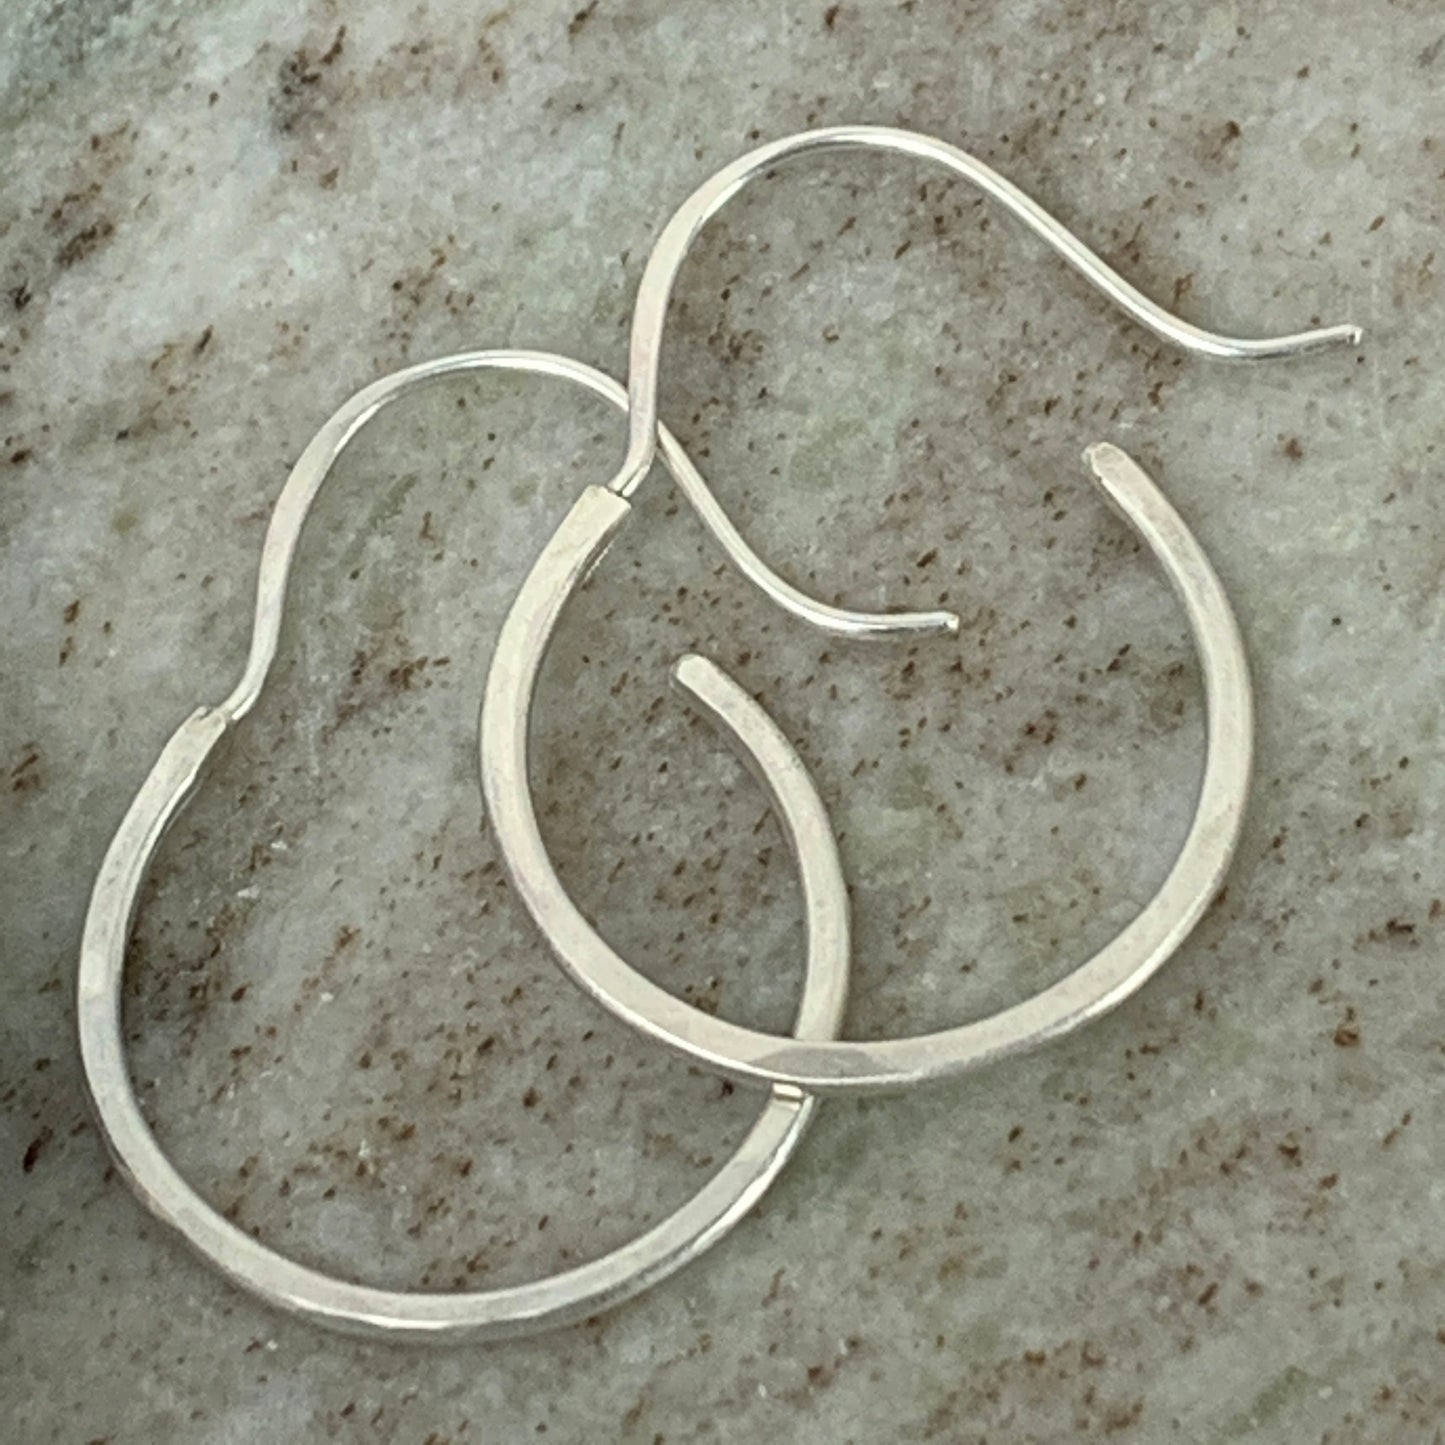 Small silver hoops - sterling silver plain hoops - forged sterling earrings - classic dainty hoops - recycled silver with rustic finish